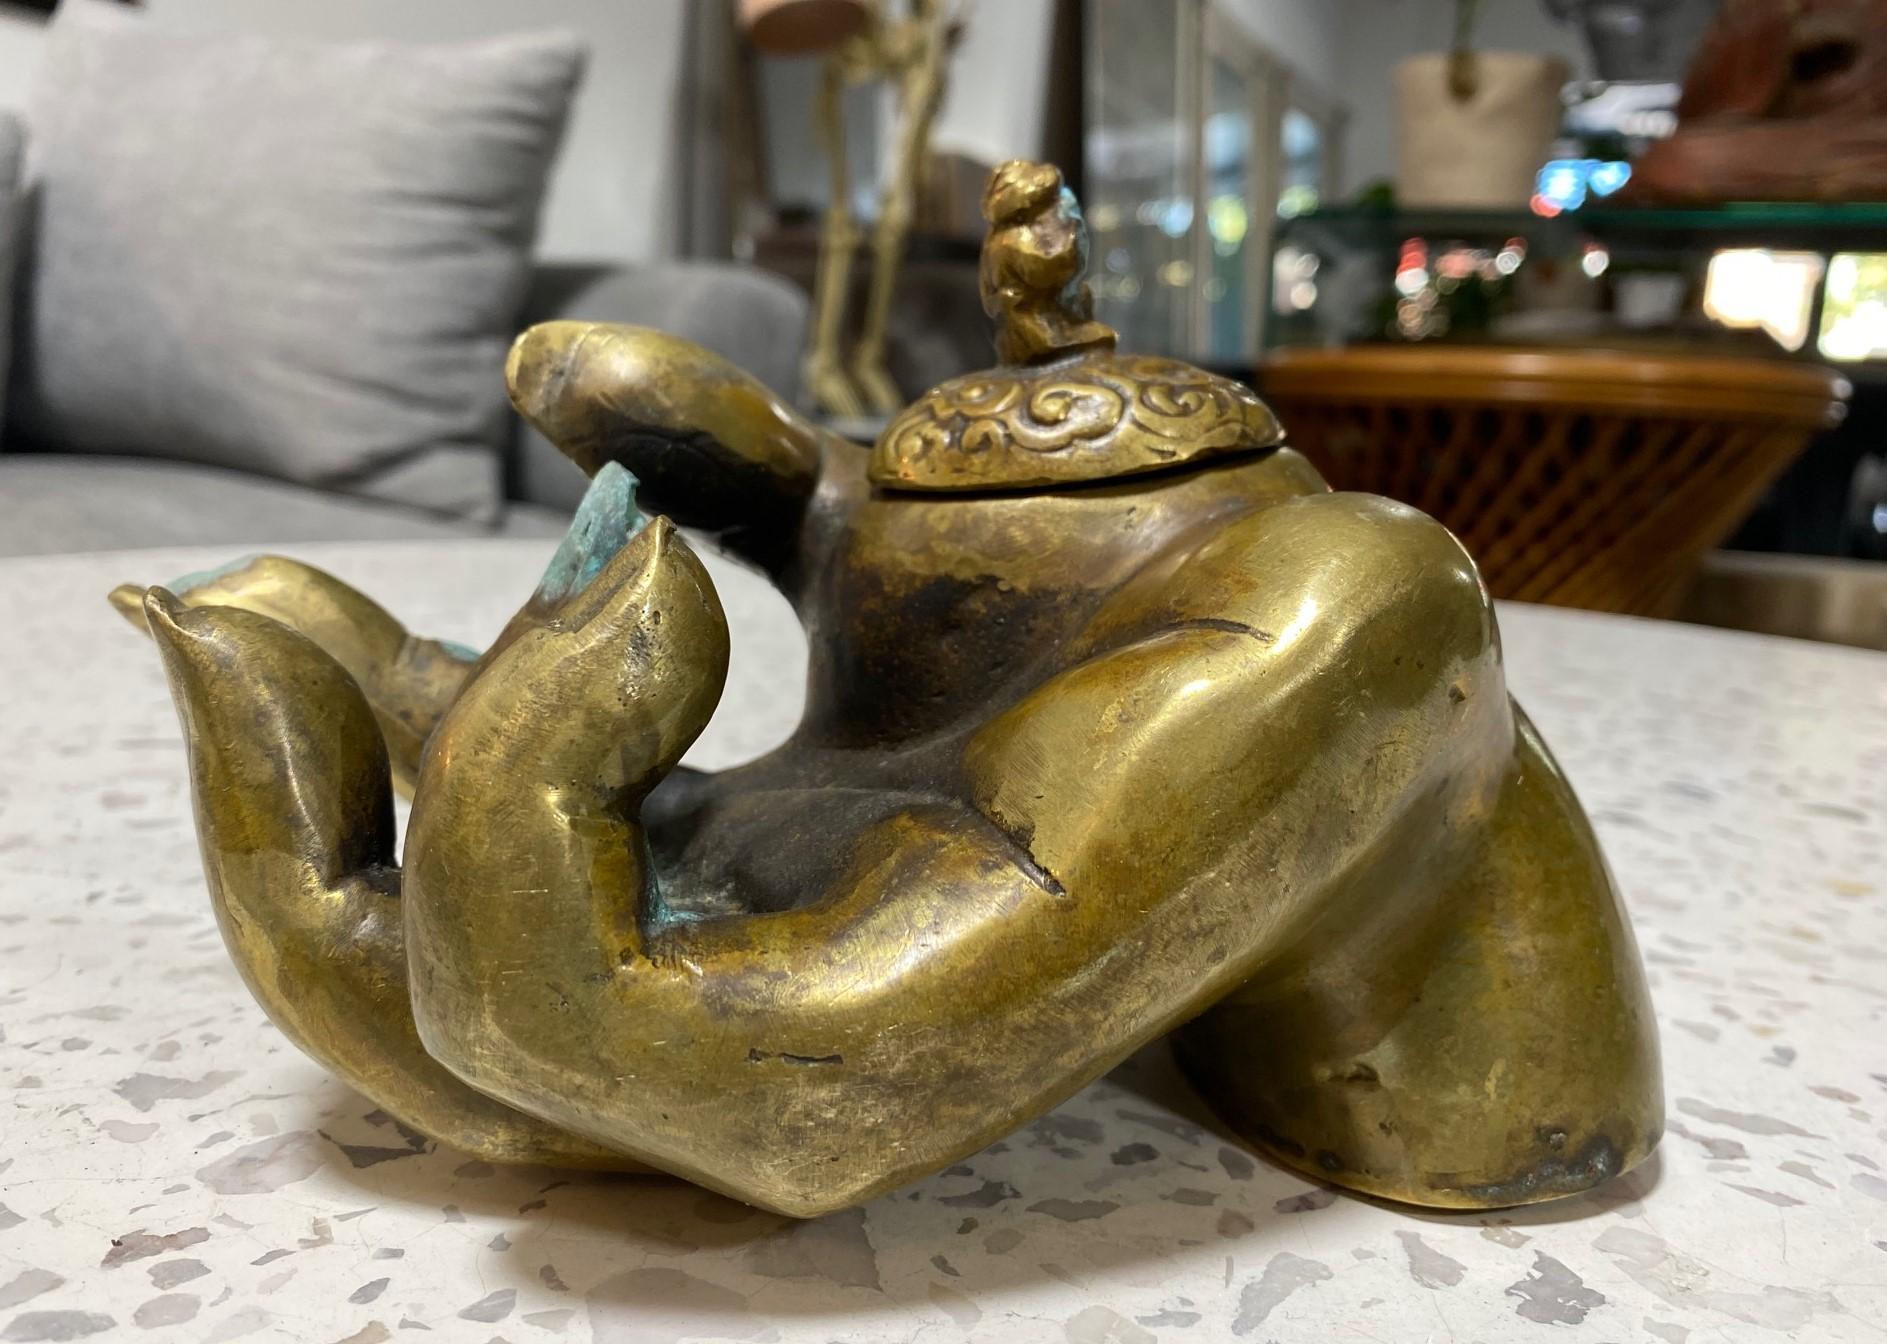 A quite fantastic, rather unique, and unusual bronze Buddha Deiety hand sculpture ( making the mudra hand gesture) that also serves as an incense censer.  We believe it is likely Japanese or Chinese.  

The sculpture is signed/marked on the base